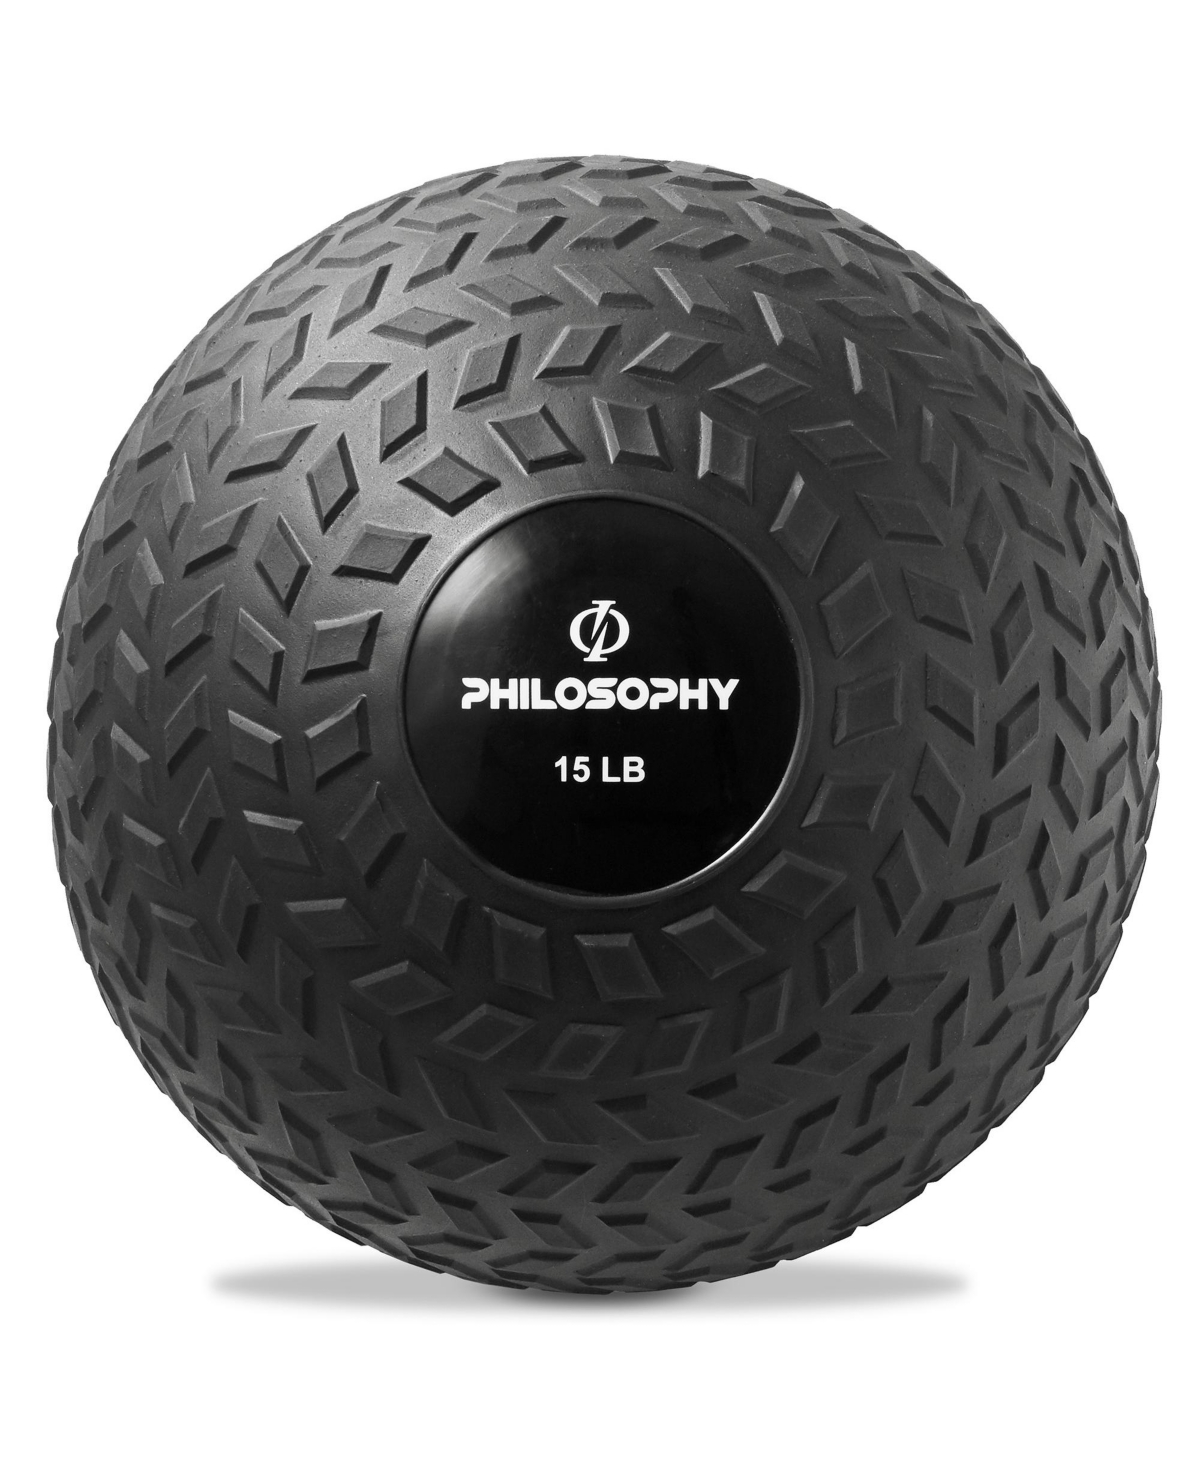 Slam Ball, 15 Lb - Weighted Fitness Medicine Ball with Easy Grip Tread - Black